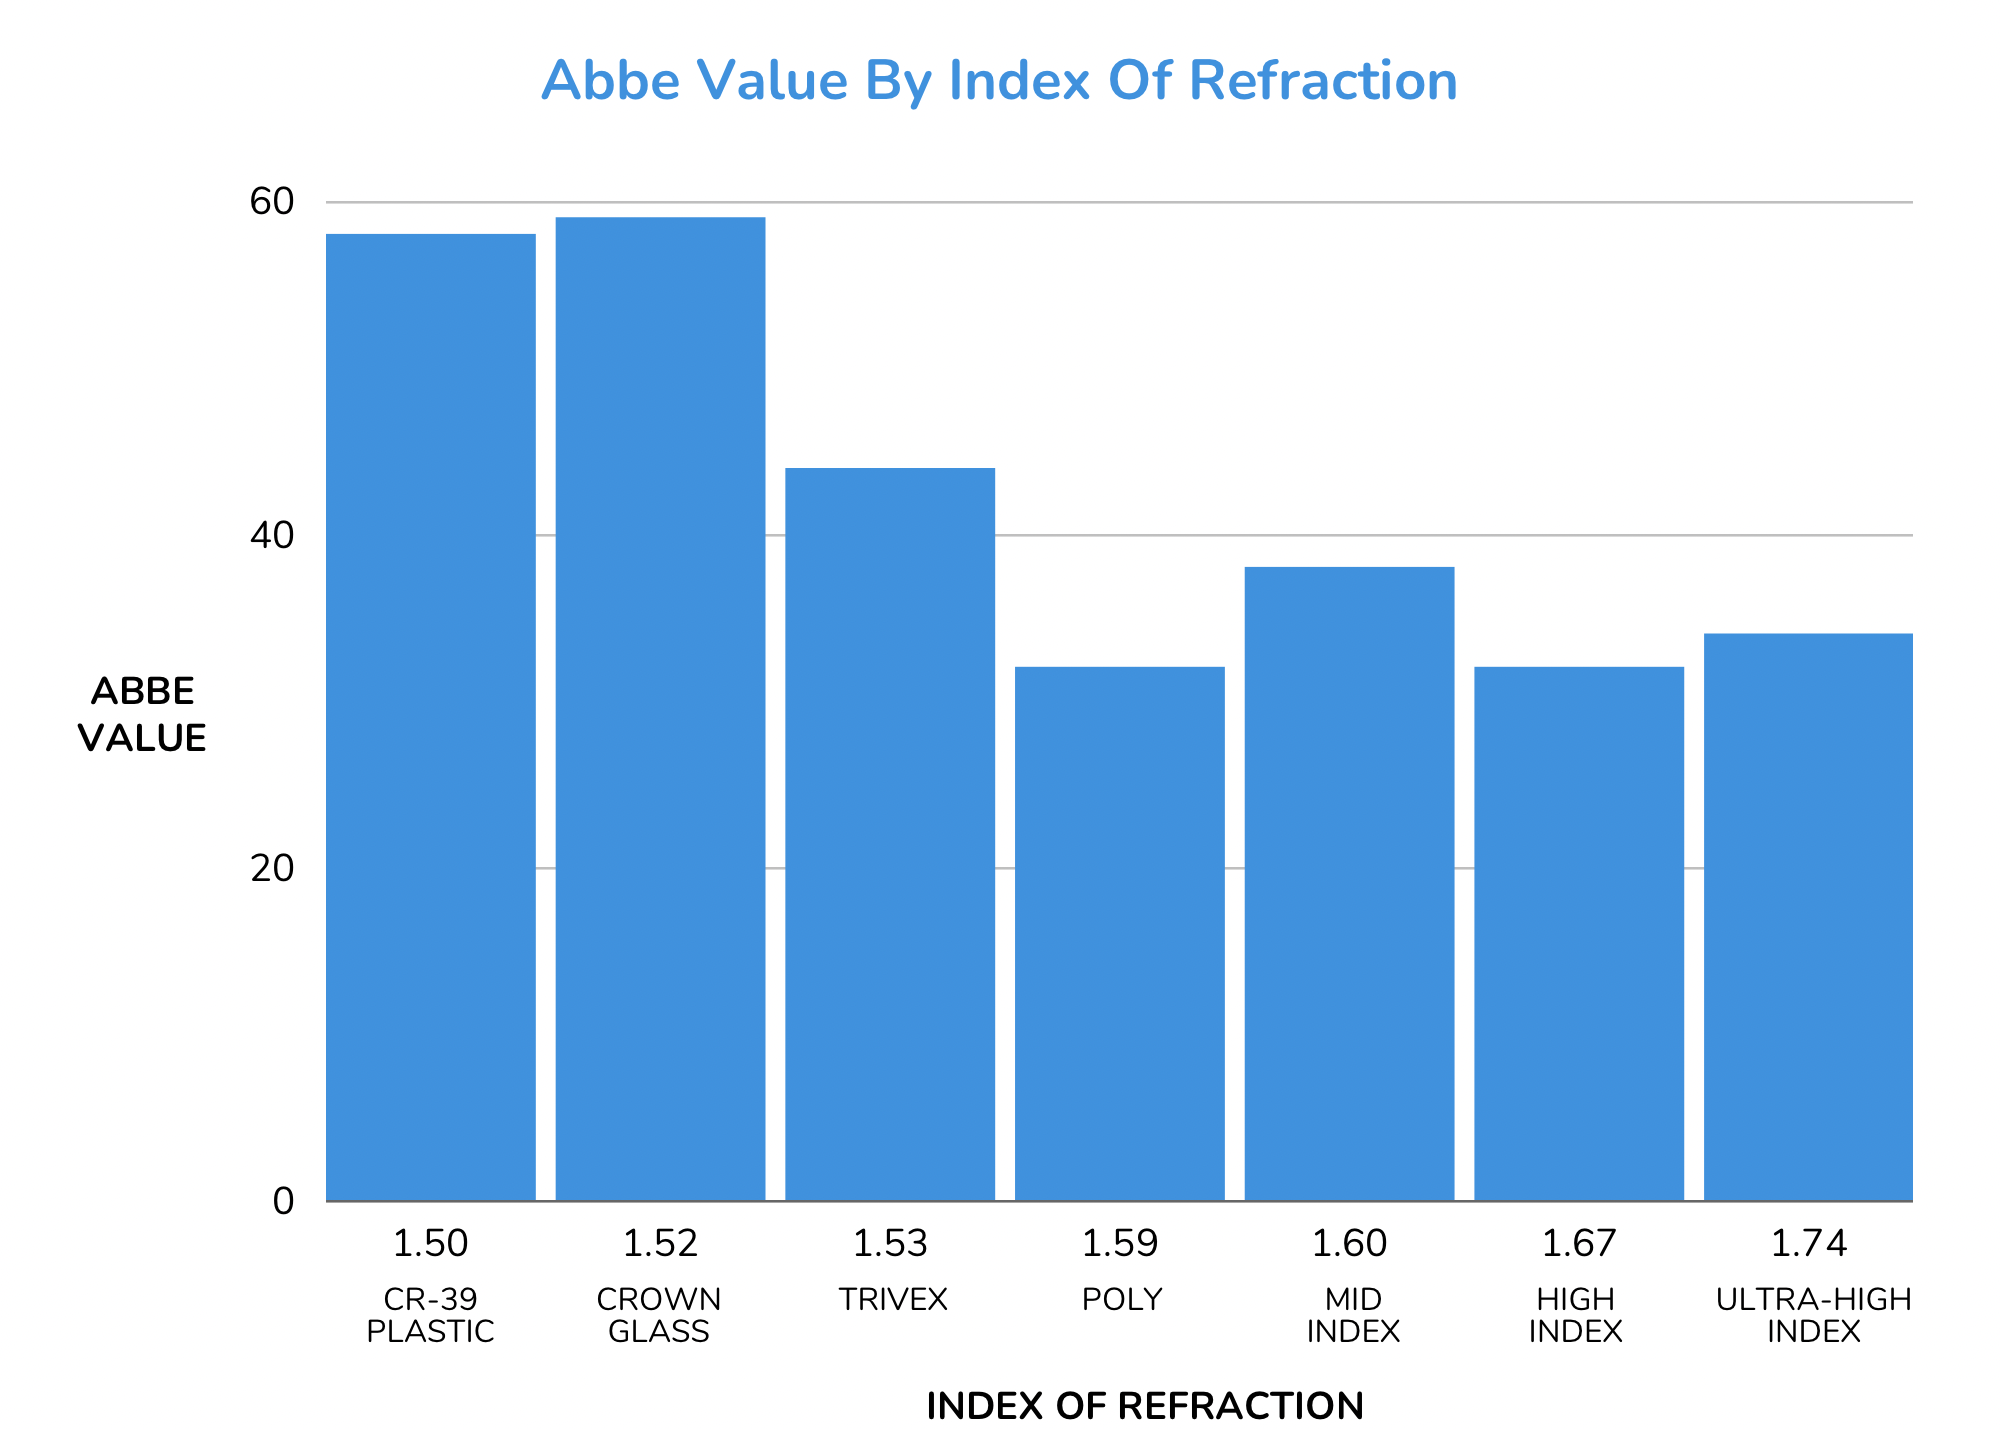 Abbe value by index of refraction